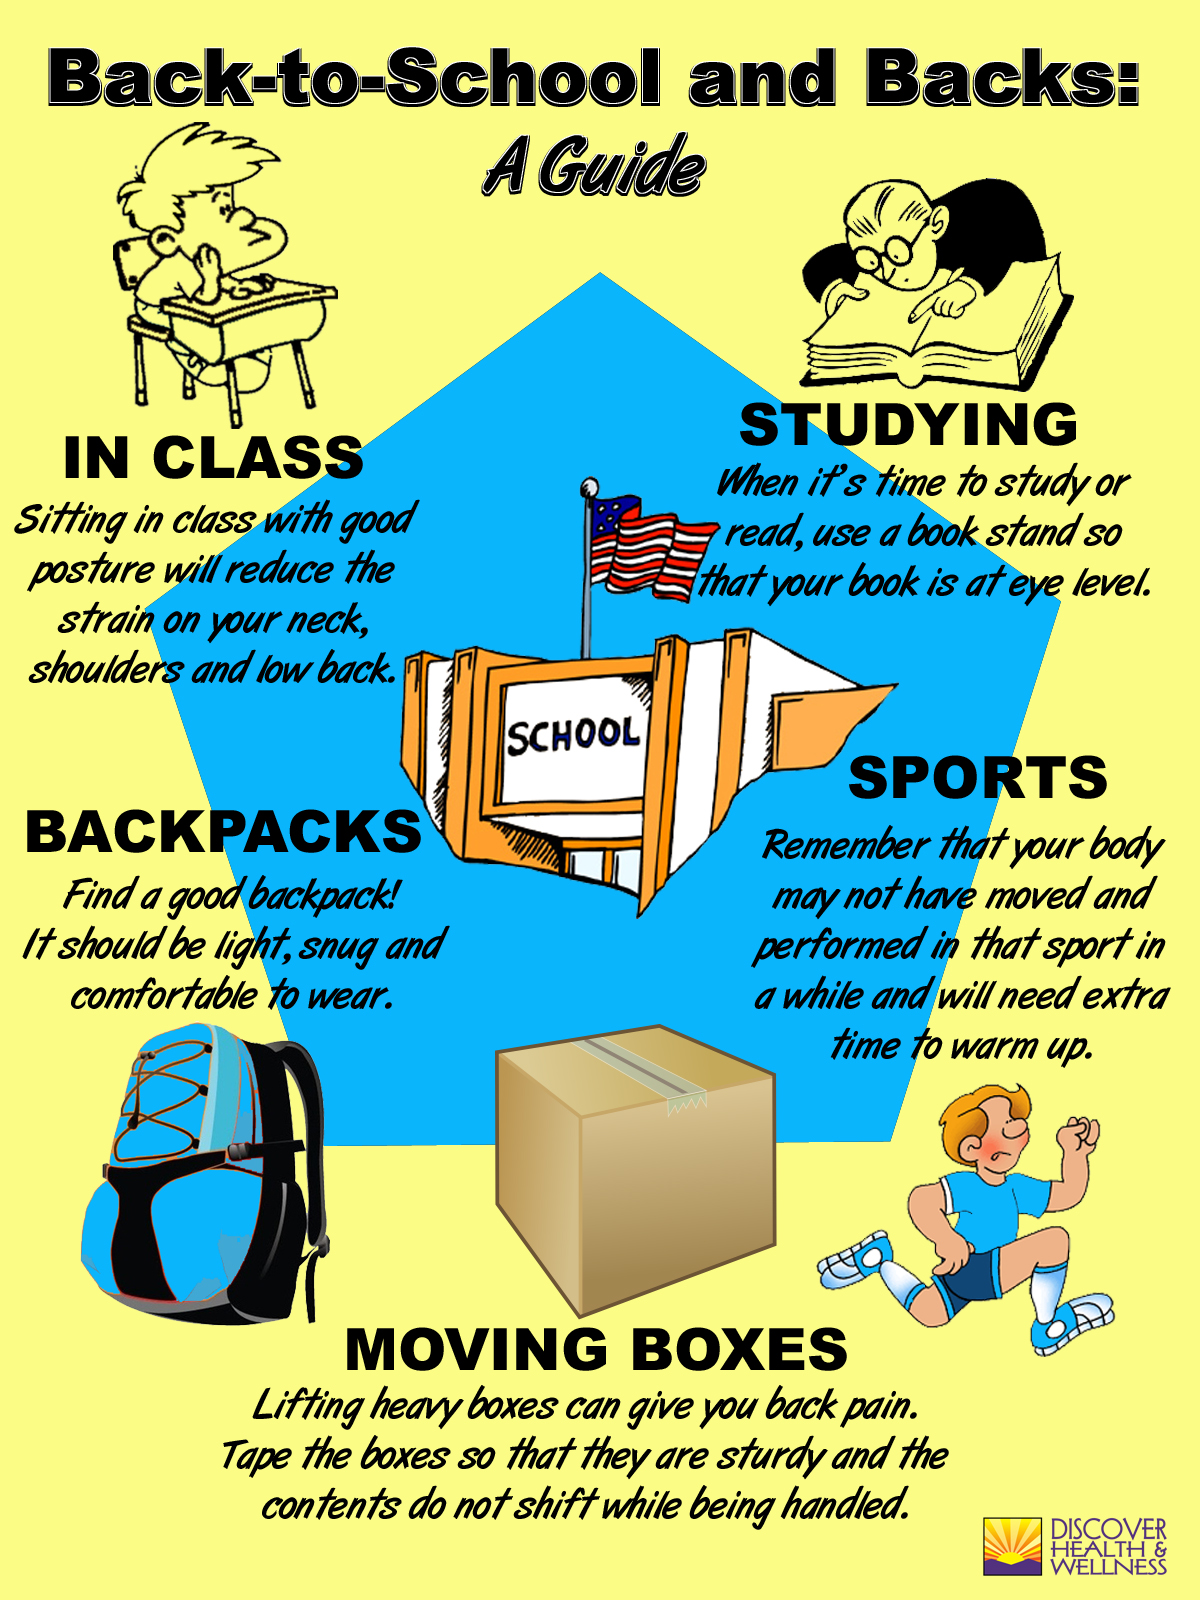 ken-caryl-colorado-chiropractic-back-to-school-back-infographic